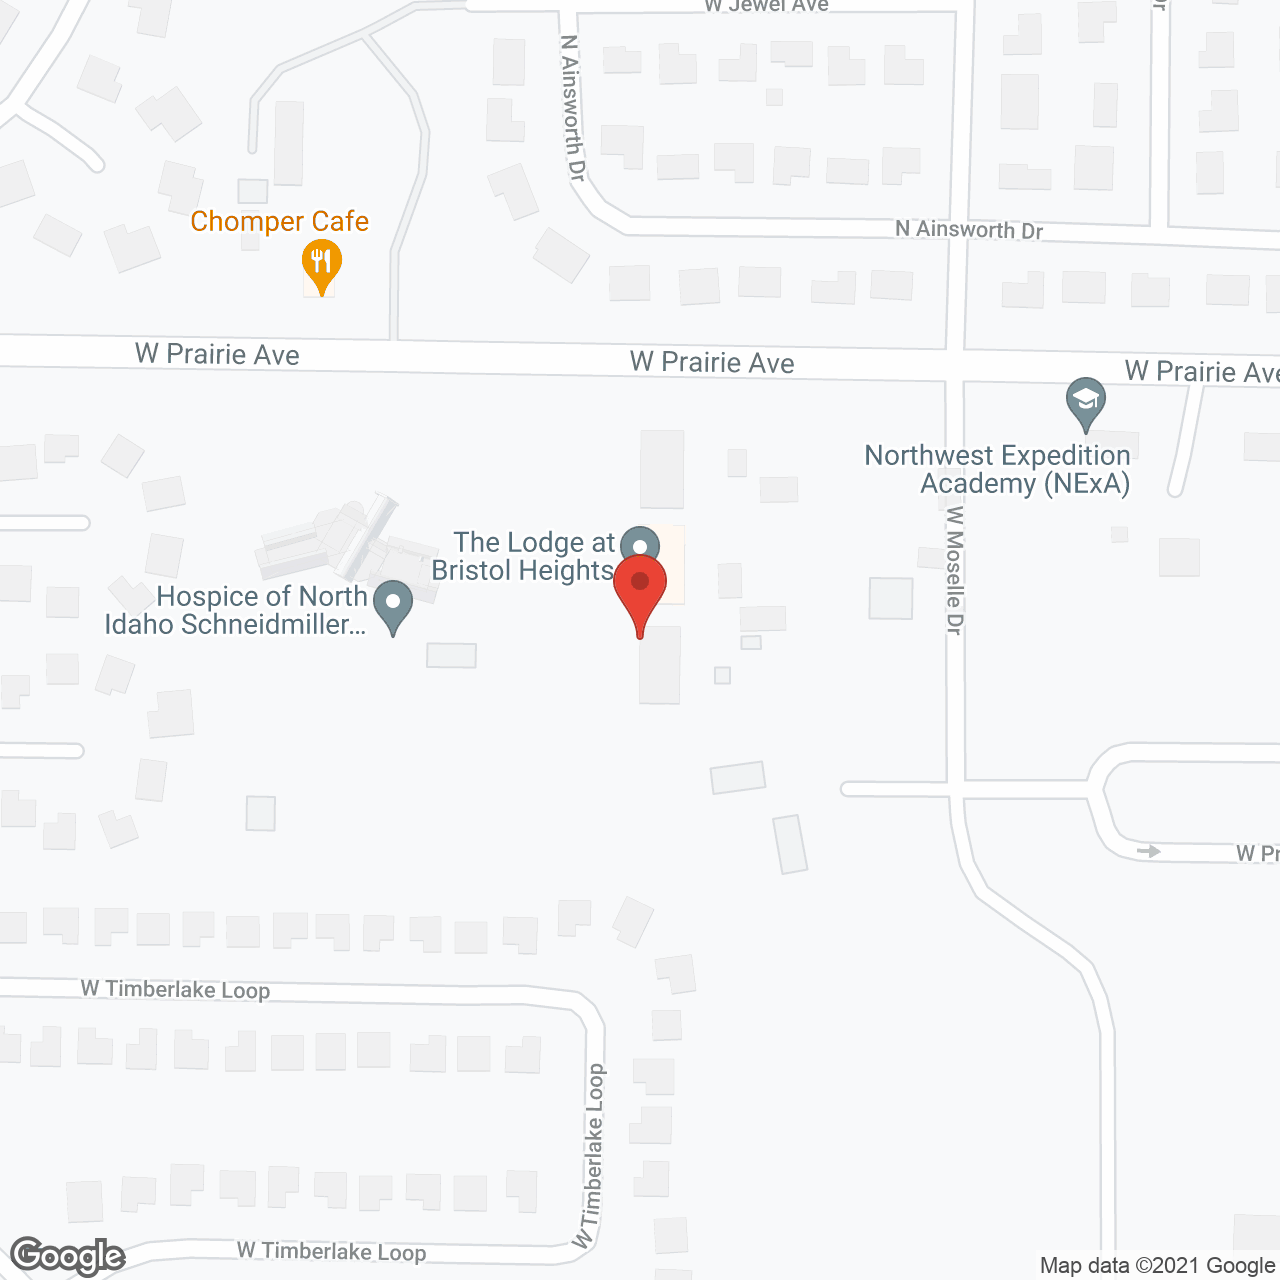 The Lodge at Bristol Heights in google map